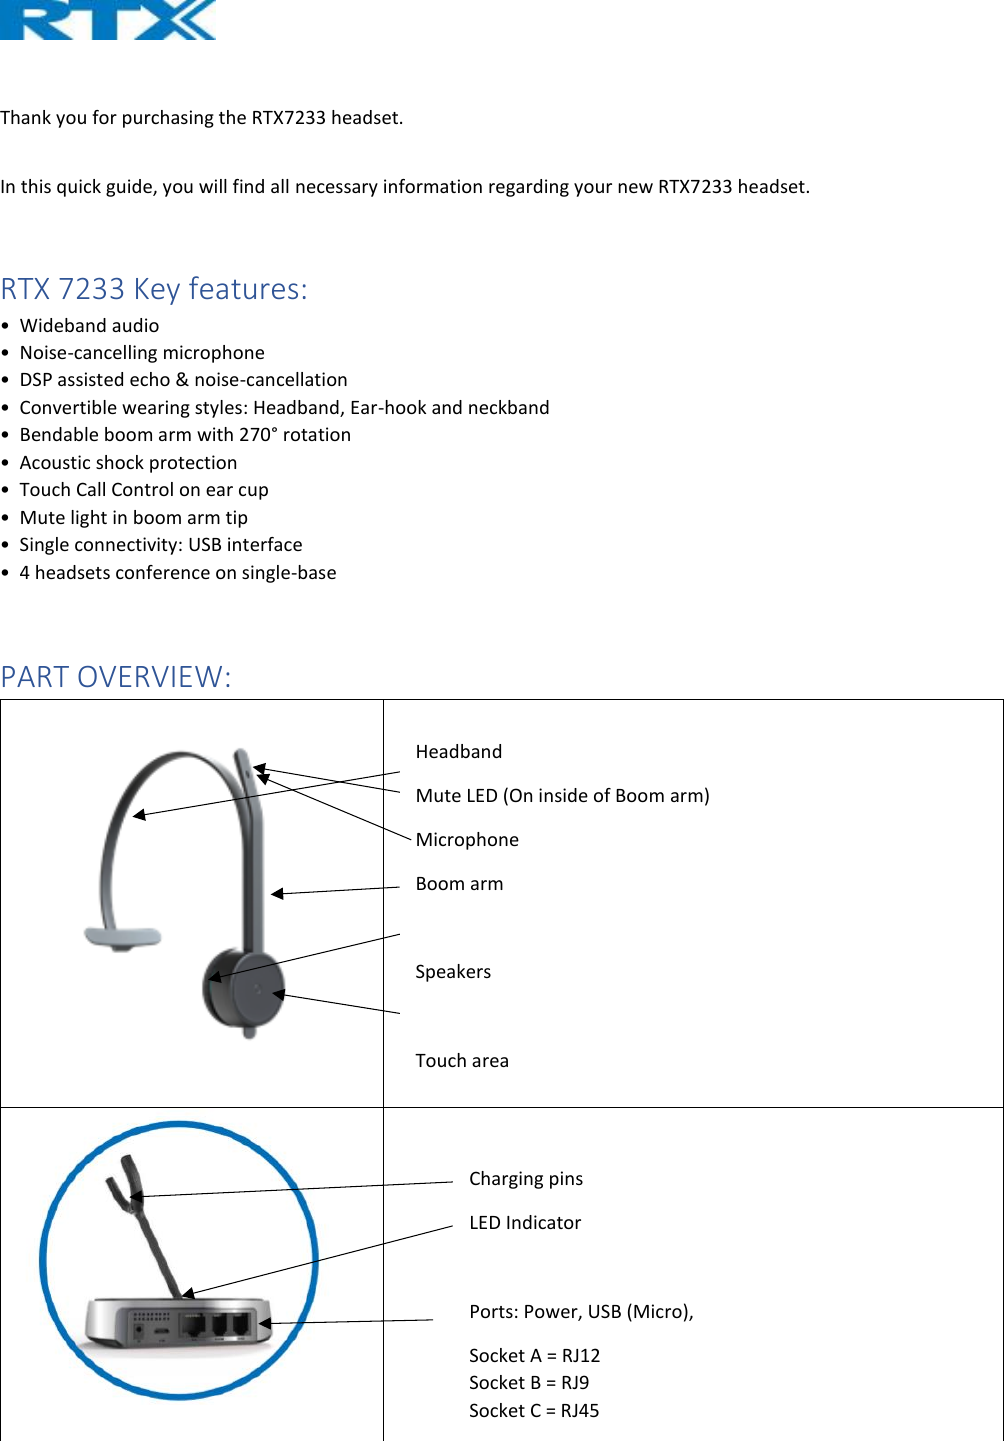   Thank you for purchasing the RTX7233 headset.   In this quick guide, you will find all necessary information regarding your new RTX7233 headset.   RTX 7233 Key features: •  Wideband audio  •  Noise-cancelling microphone  •  DSP assisted echo &amp; noise-cancellation  •  Convertible wearing styles: Headband, Ear-hook and neckband  •  Bendable boom arm with 270° rotation  •  Acoustic shock protection  •  Touch Call Control on ear cup  •  Mute light in boom arm tip  •  Single connectivity: USB interface  •  4 headsets conference on single-base  PART OVERVIEW:     Charging pins LED Indicator  Ports: Power, USB (Micro),  Socket A = RJ12  Socket B = RJ9 Socket C = RJ45 Headband Mute LED (On inside of Boom arm) Microphone Boom arm  Speakers  Touch area 